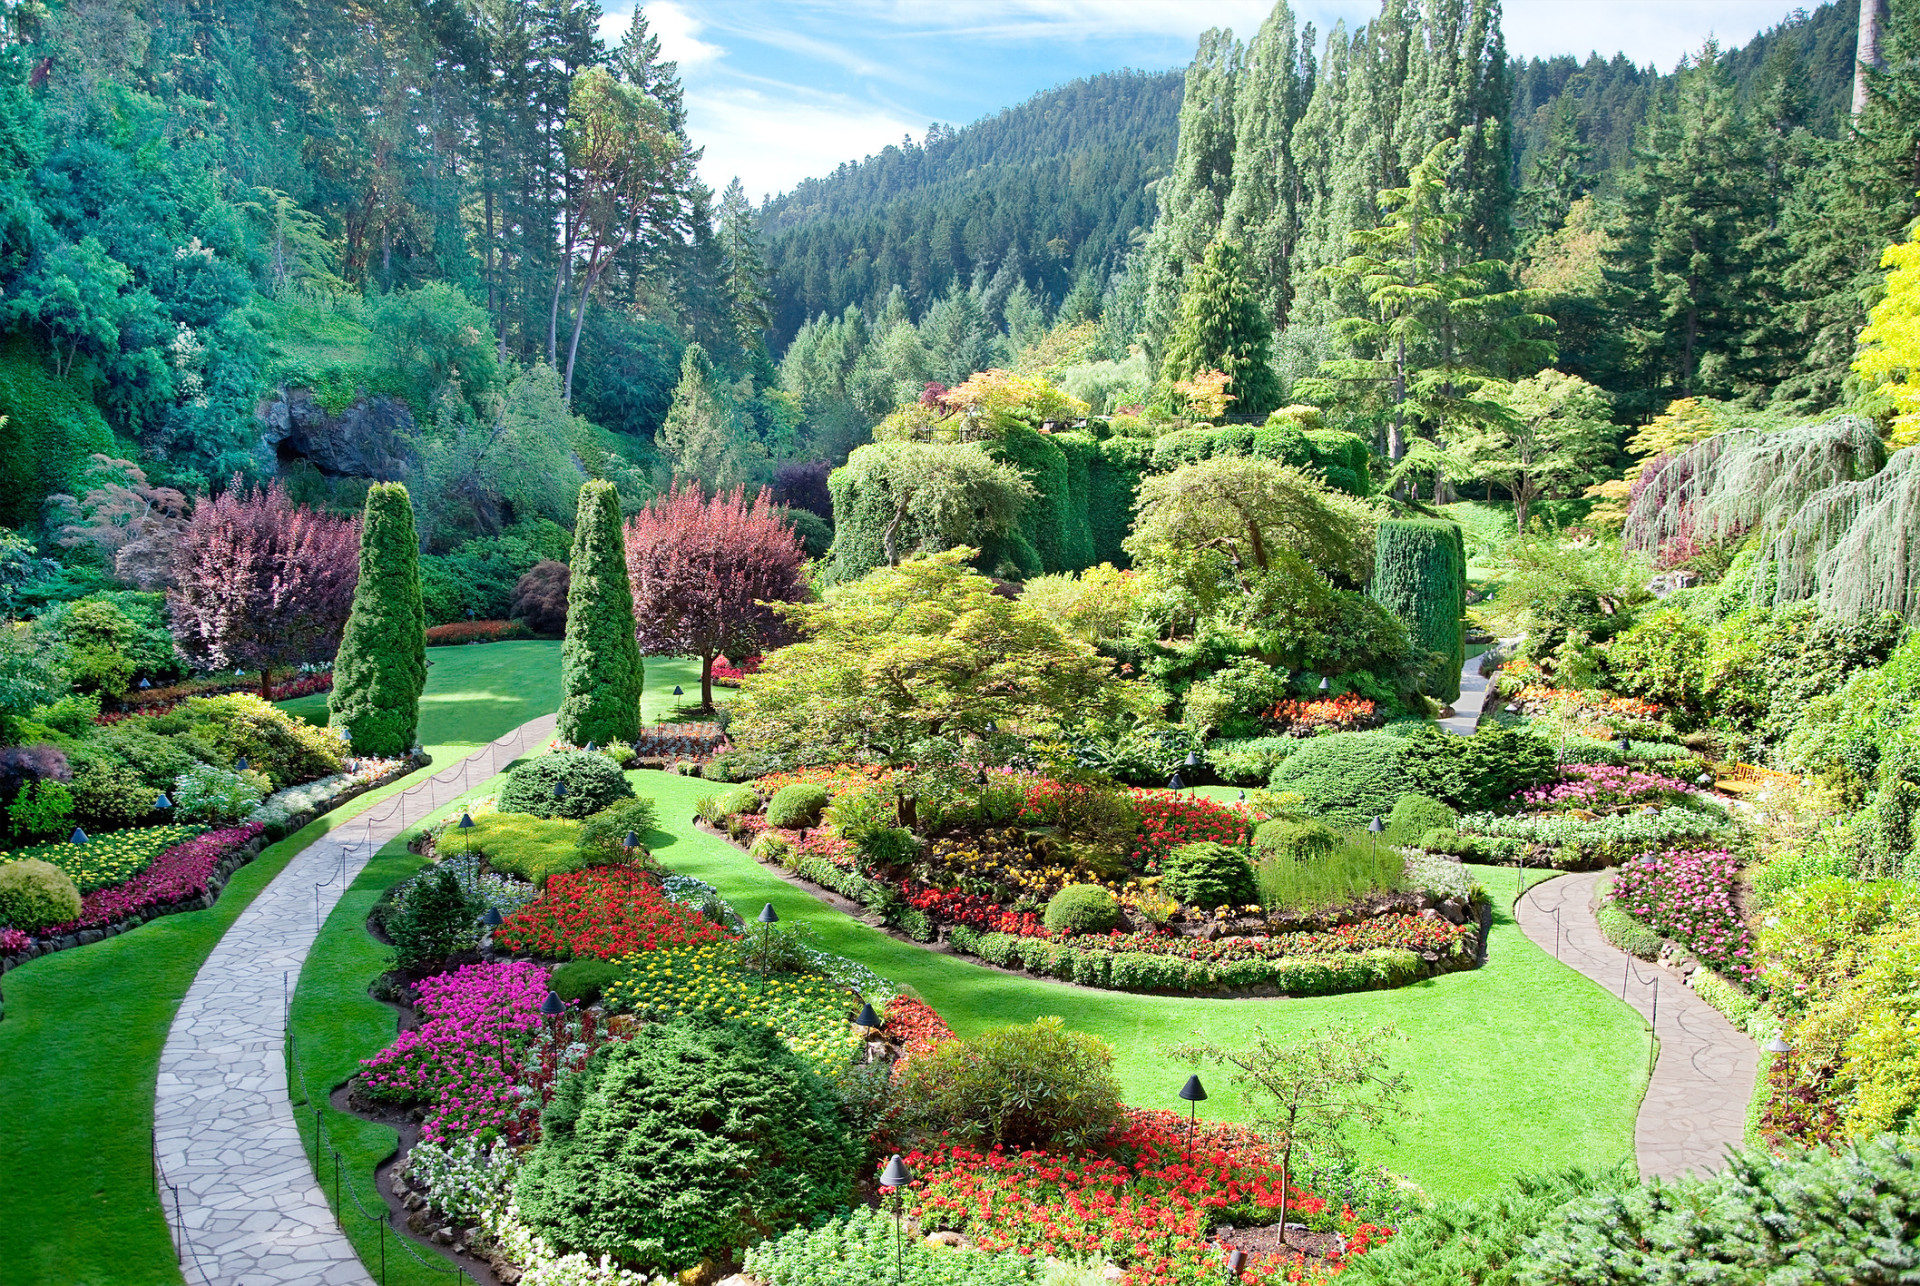 Victoria is known for its wealth of outdoor activities as well as history, and one stop you should definitely make is the Butchart Gardens, a botanical garden with 55 acres of gorgeous and vibrant floral displays among which you can elegantly stretch your legs.<p><a href="https://www.msn.com/en-us/community/channel/vid-7xx8mnucu55yw63we9va2gwr7uihbxwc68fxqp25x6tg4ftibpra?cvid=94631541bc0f4f89bfd59158d696ad7e">Follow us and access great exclusive content every day</a></p>